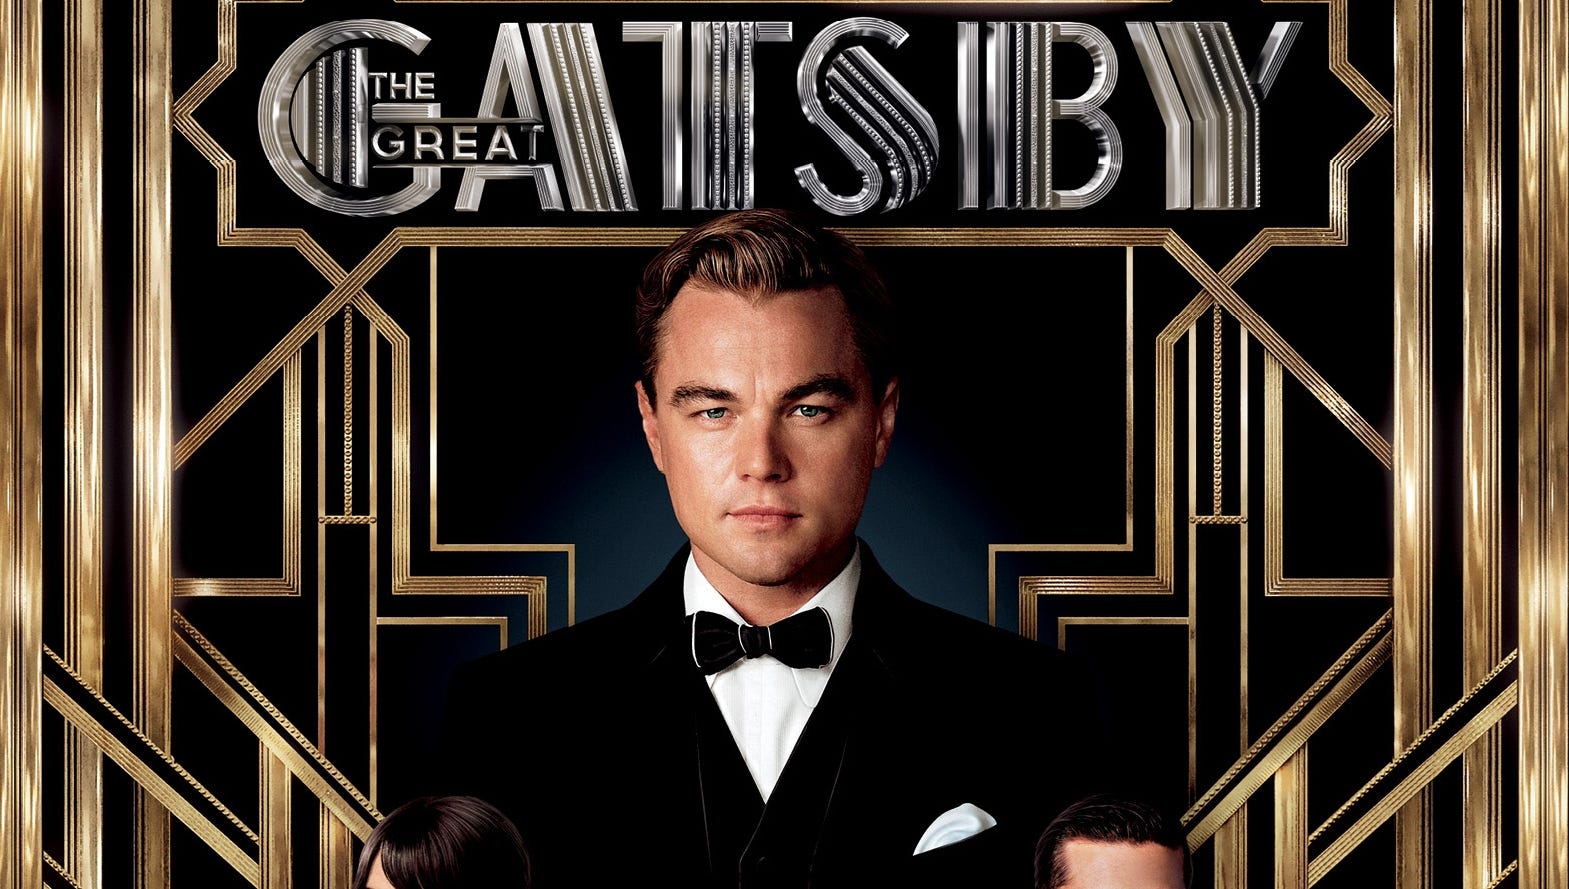 The fifth film version of 'The Great Gatsby' sparks debate over t...